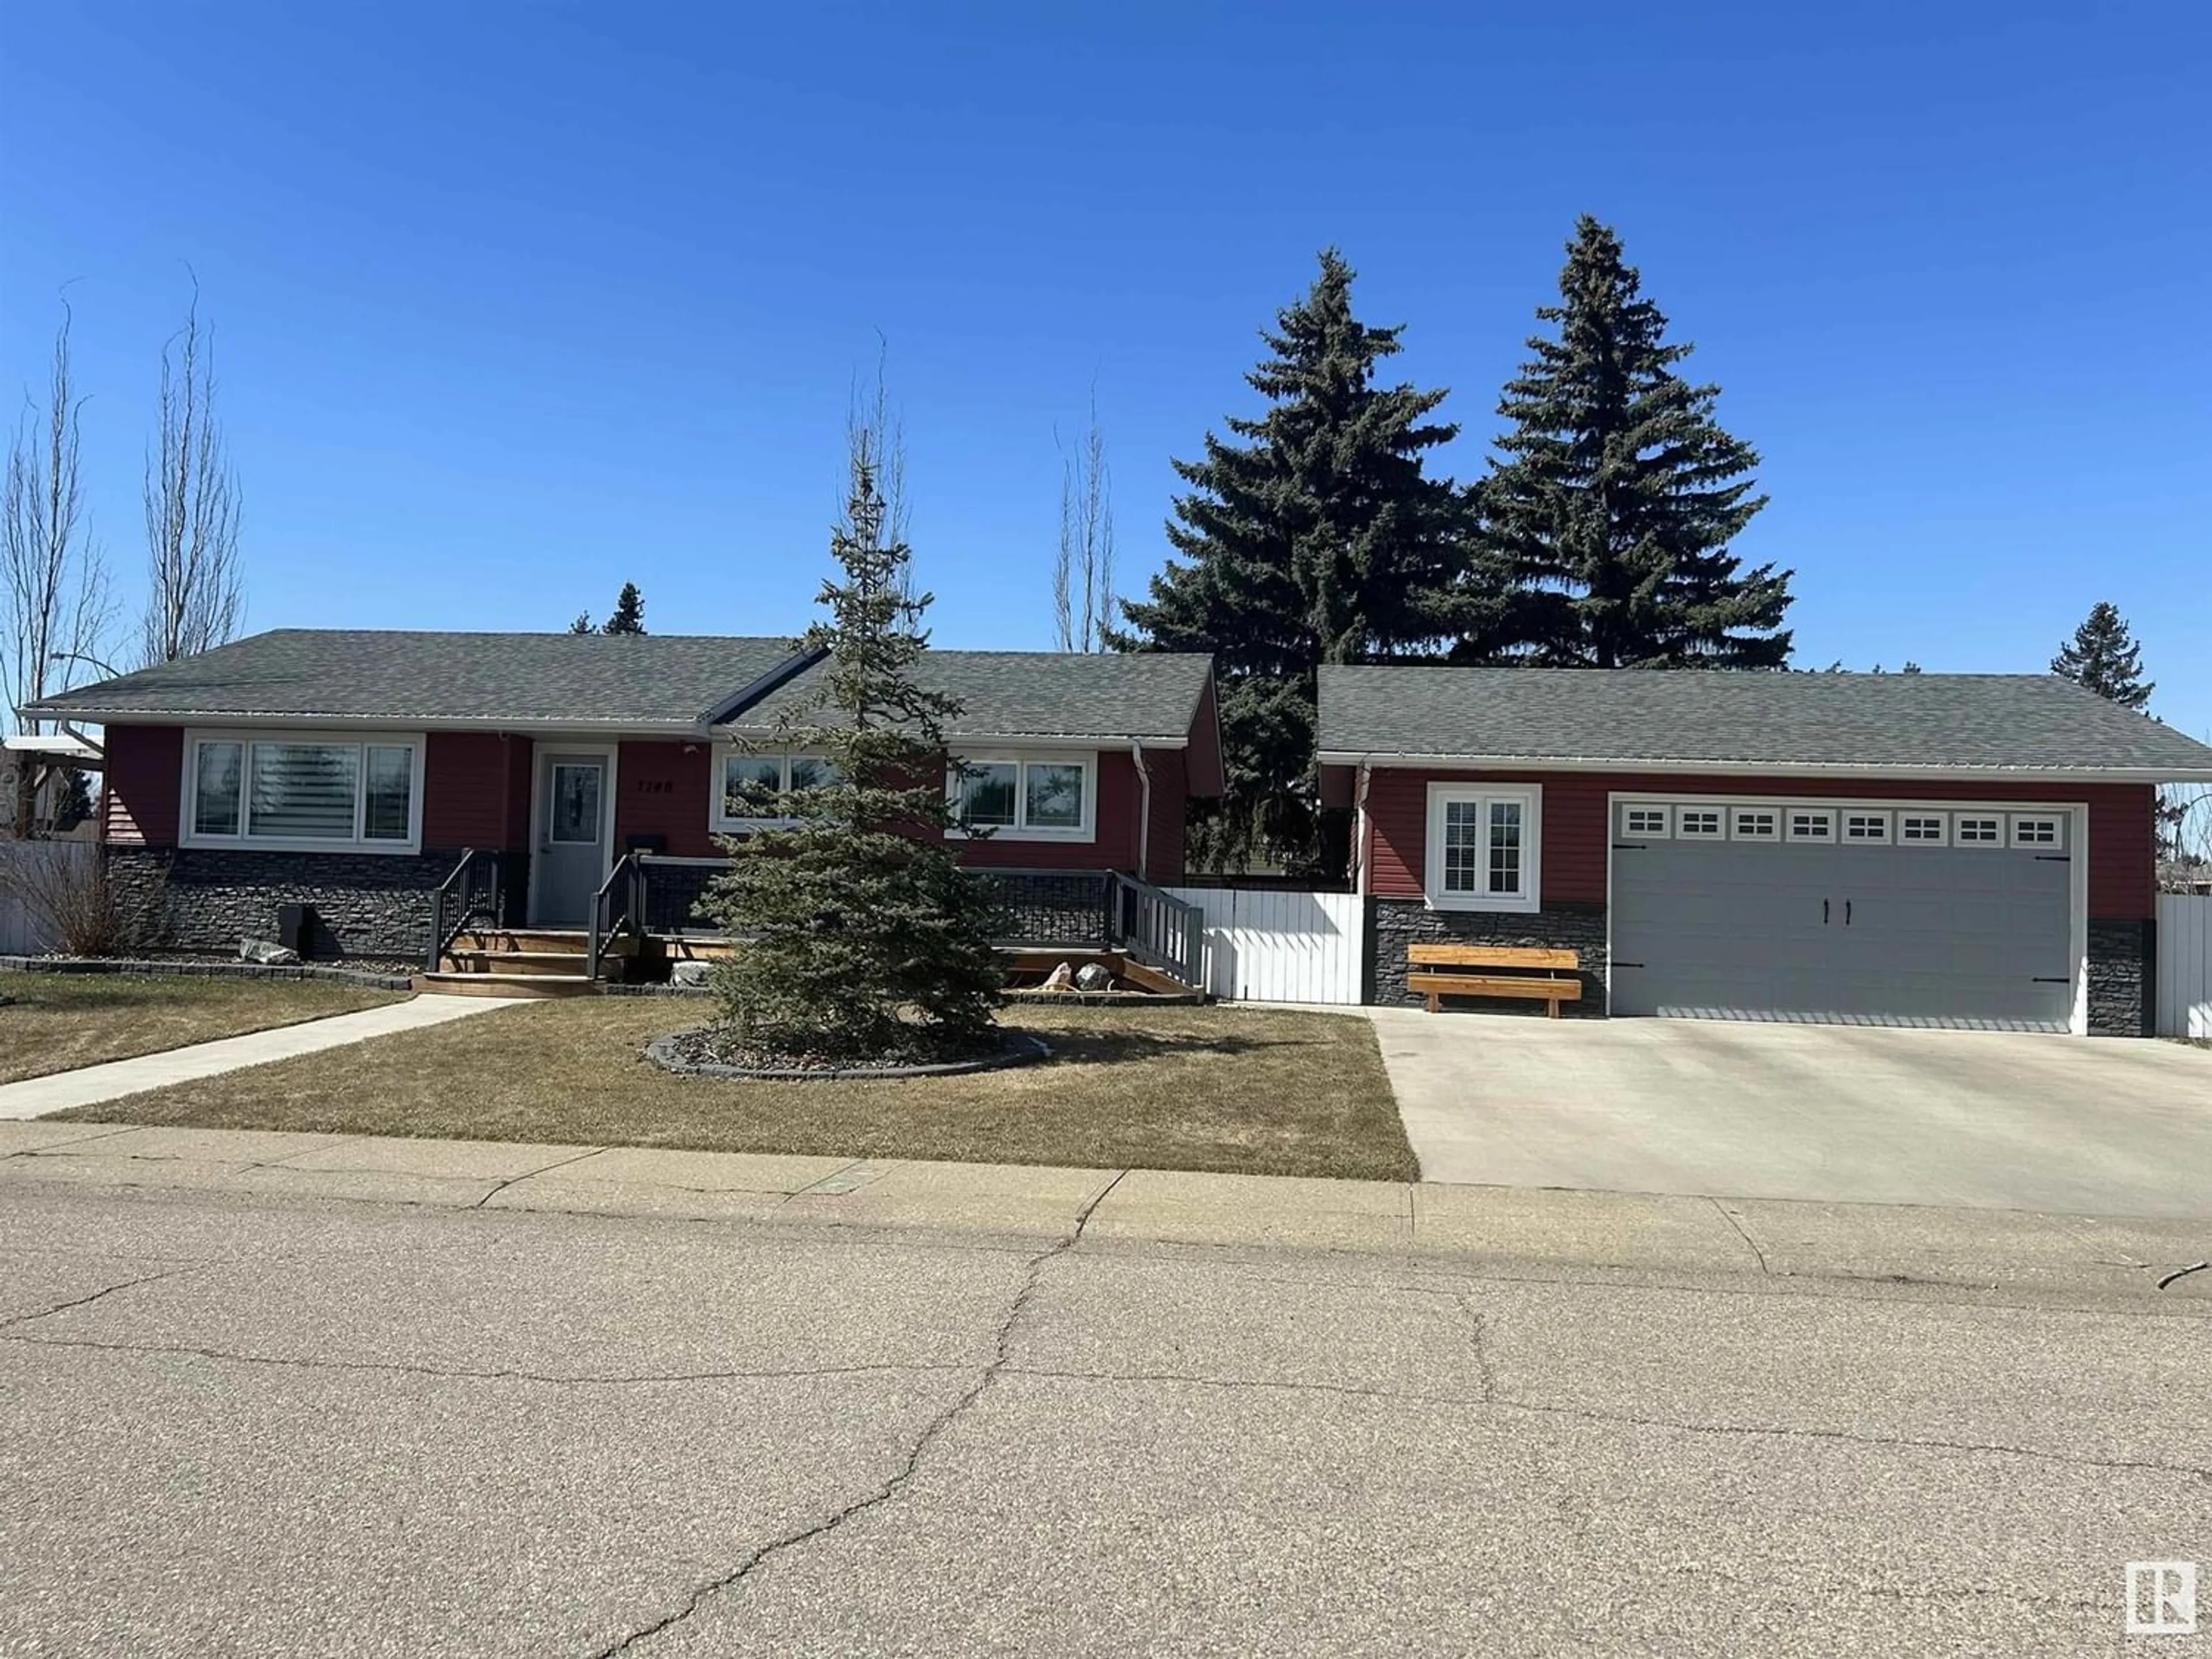 A pic from exterior of the house or condo for 1148 77 ST NW, Edmonton Alberta T6K2R8